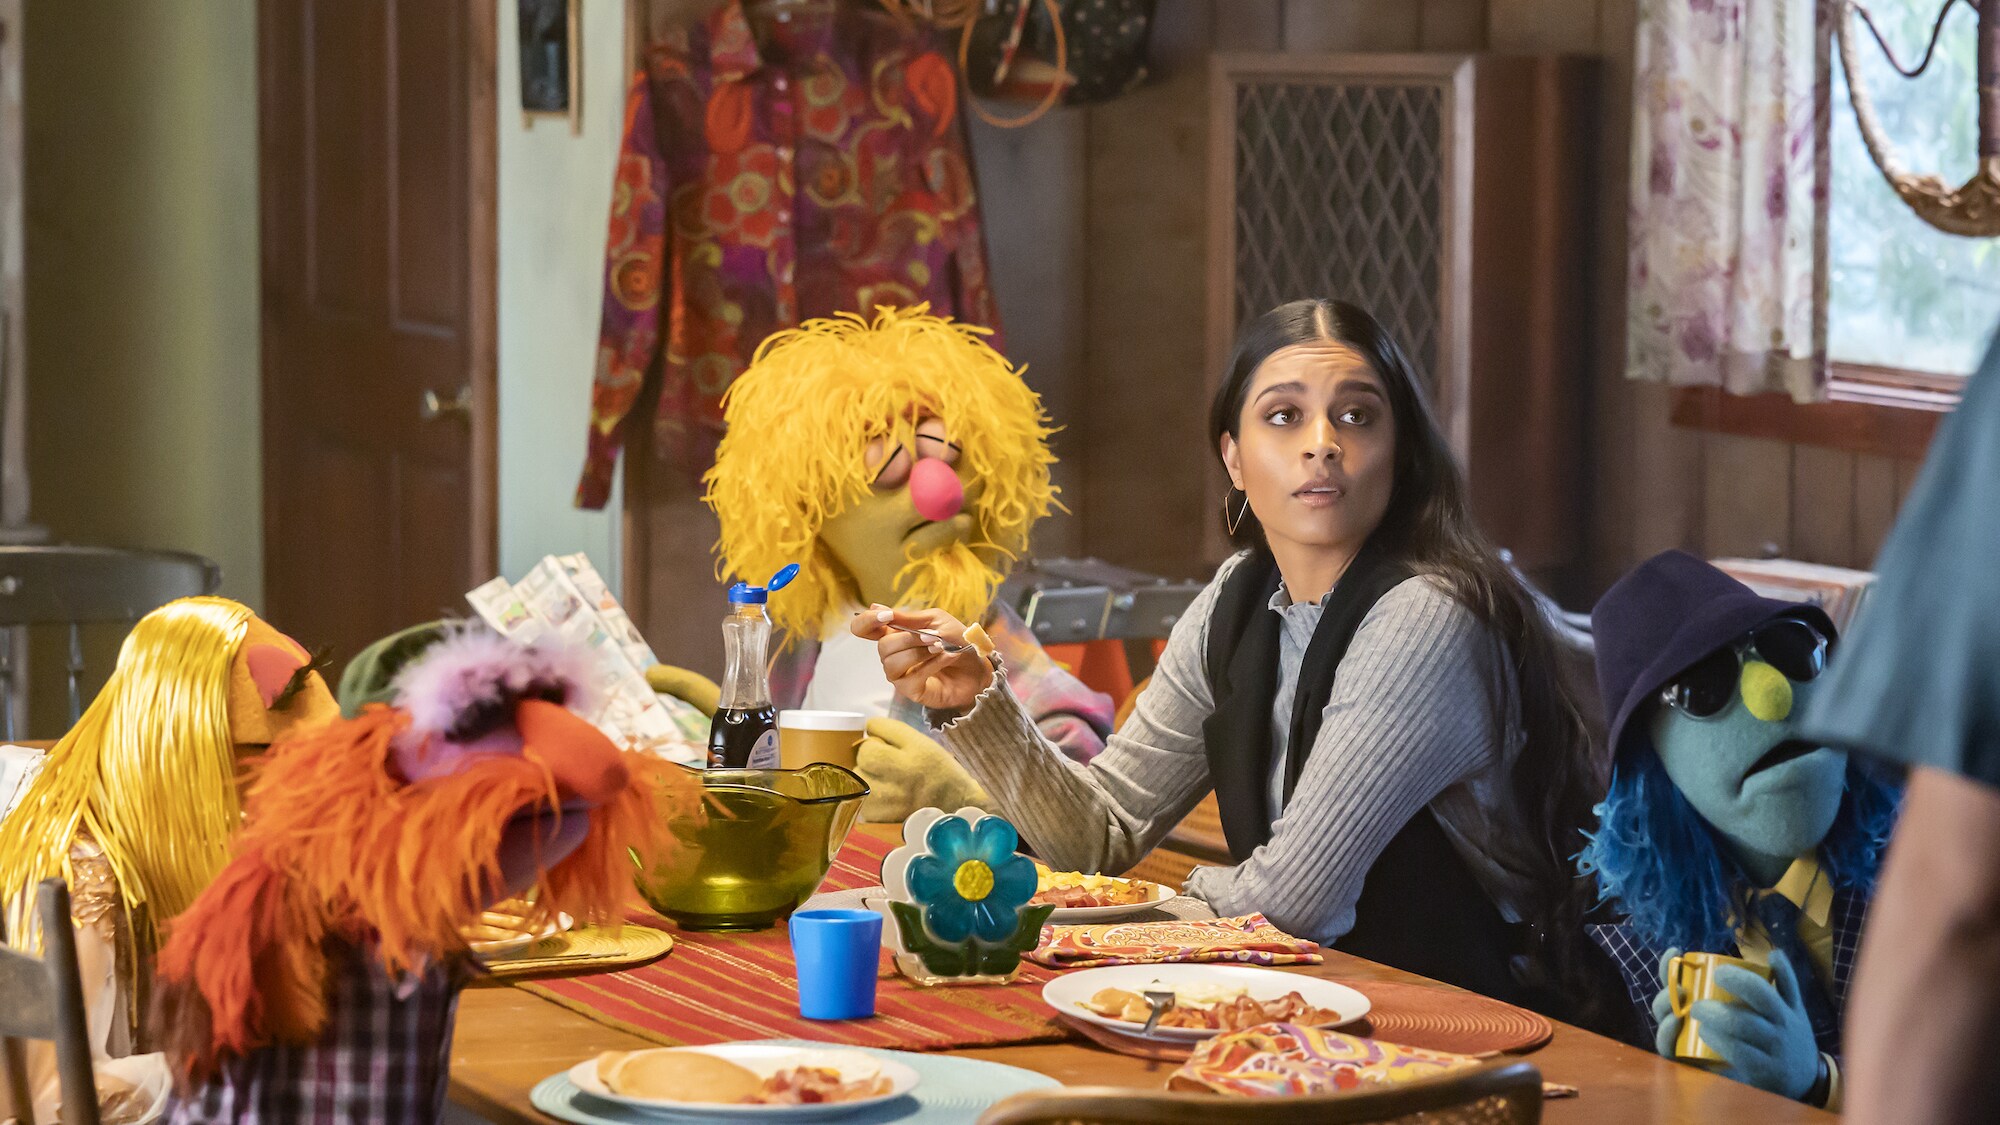 THE MUPPETS MAYHEM - “Track 4: The Times They Are A-Changin” (Disney/Mitch Haaseth) JANICE, FLOYD PEPPER, LIPS, LILLY SINGH, ZOOT